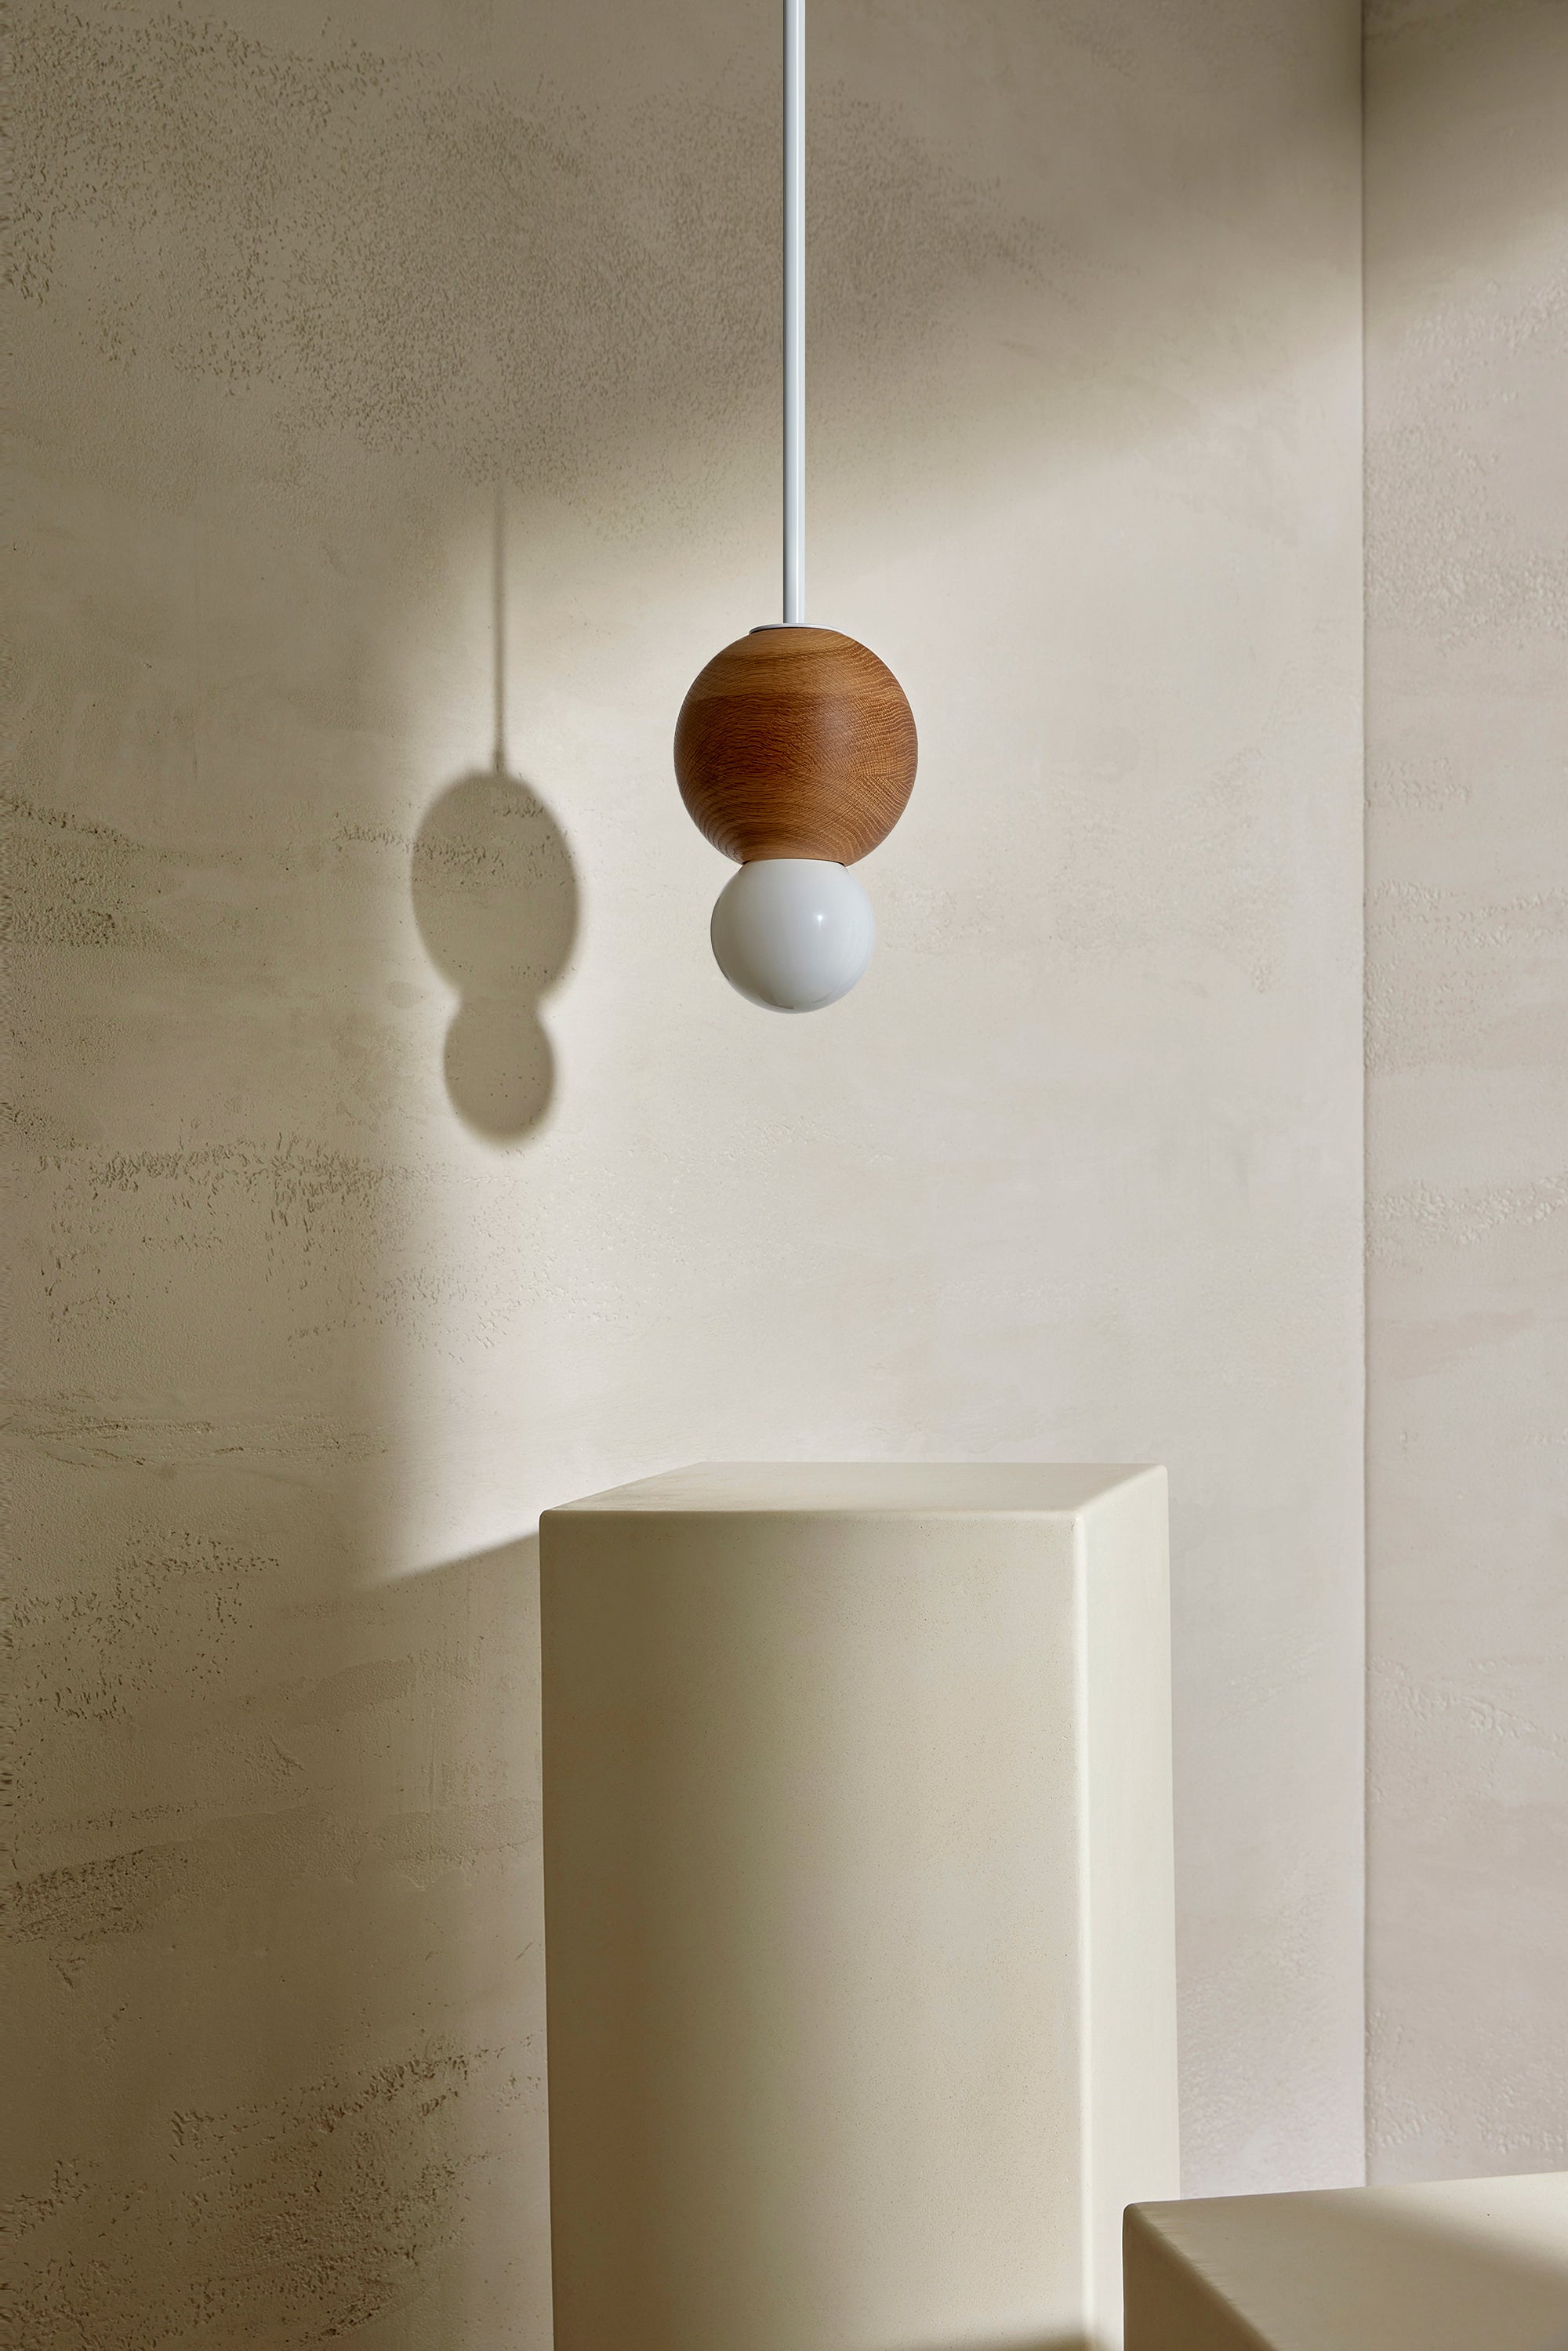 Bright Beads Sphere Pendant in Oak, White Satin & Opal. Photographed by Lawrence Furzey.